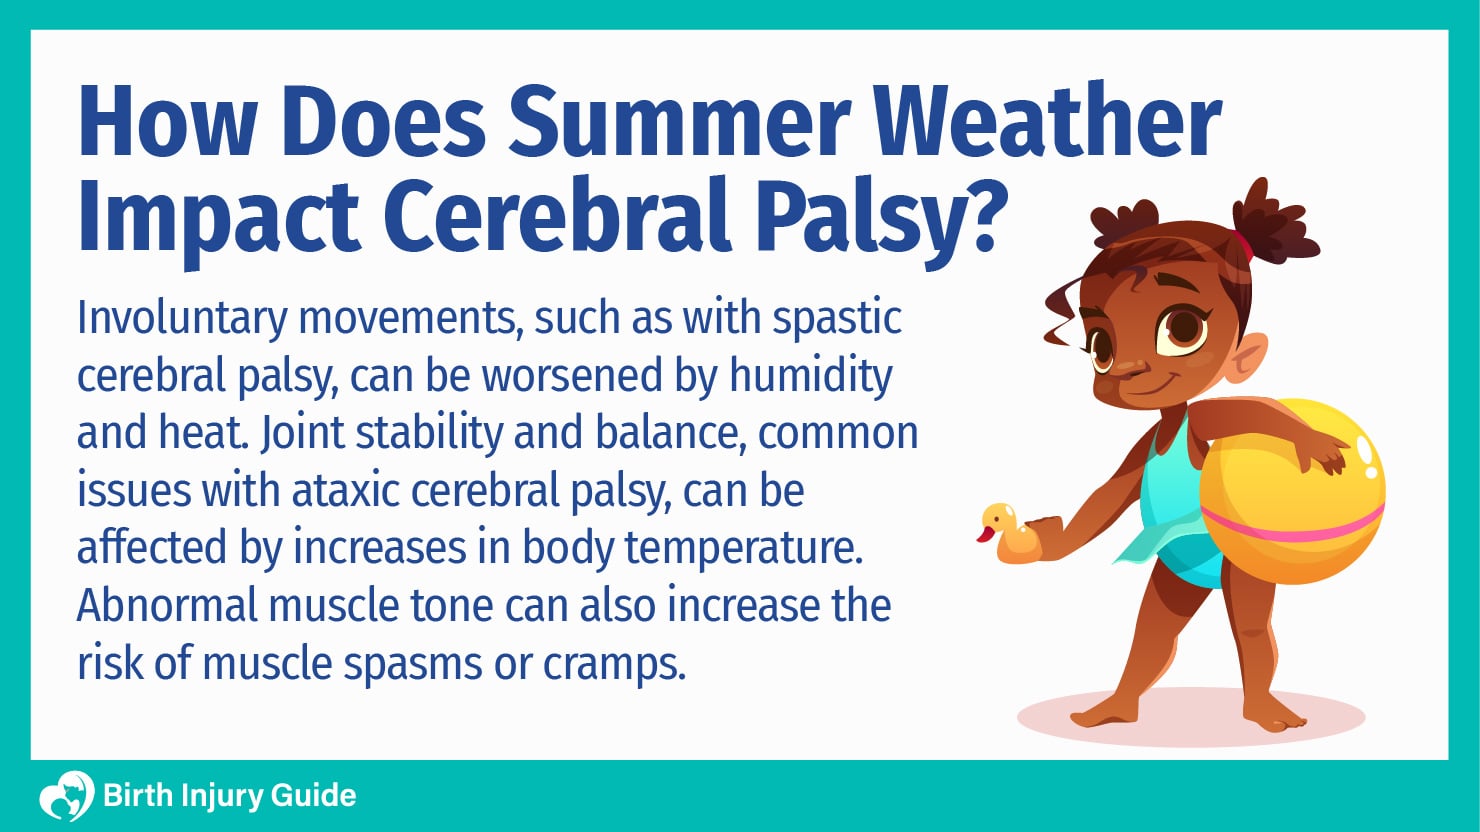 how does summer weather impact cerebral palsy?